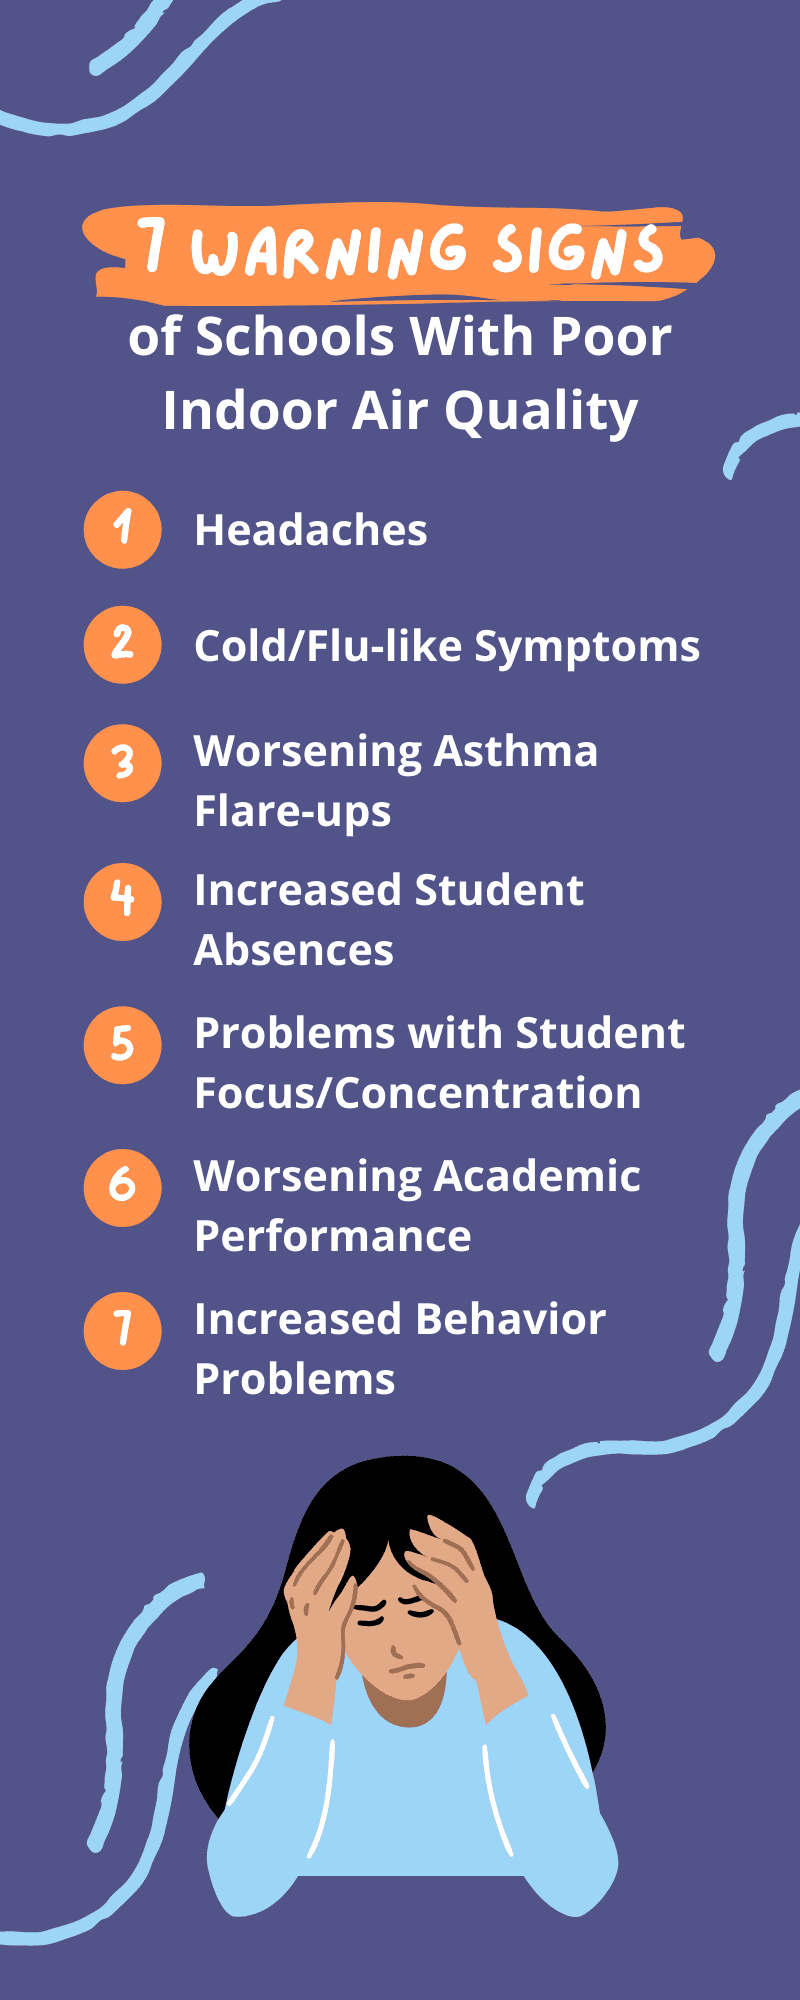 Infographic displaying 7 symptoms of poor indoor air quality